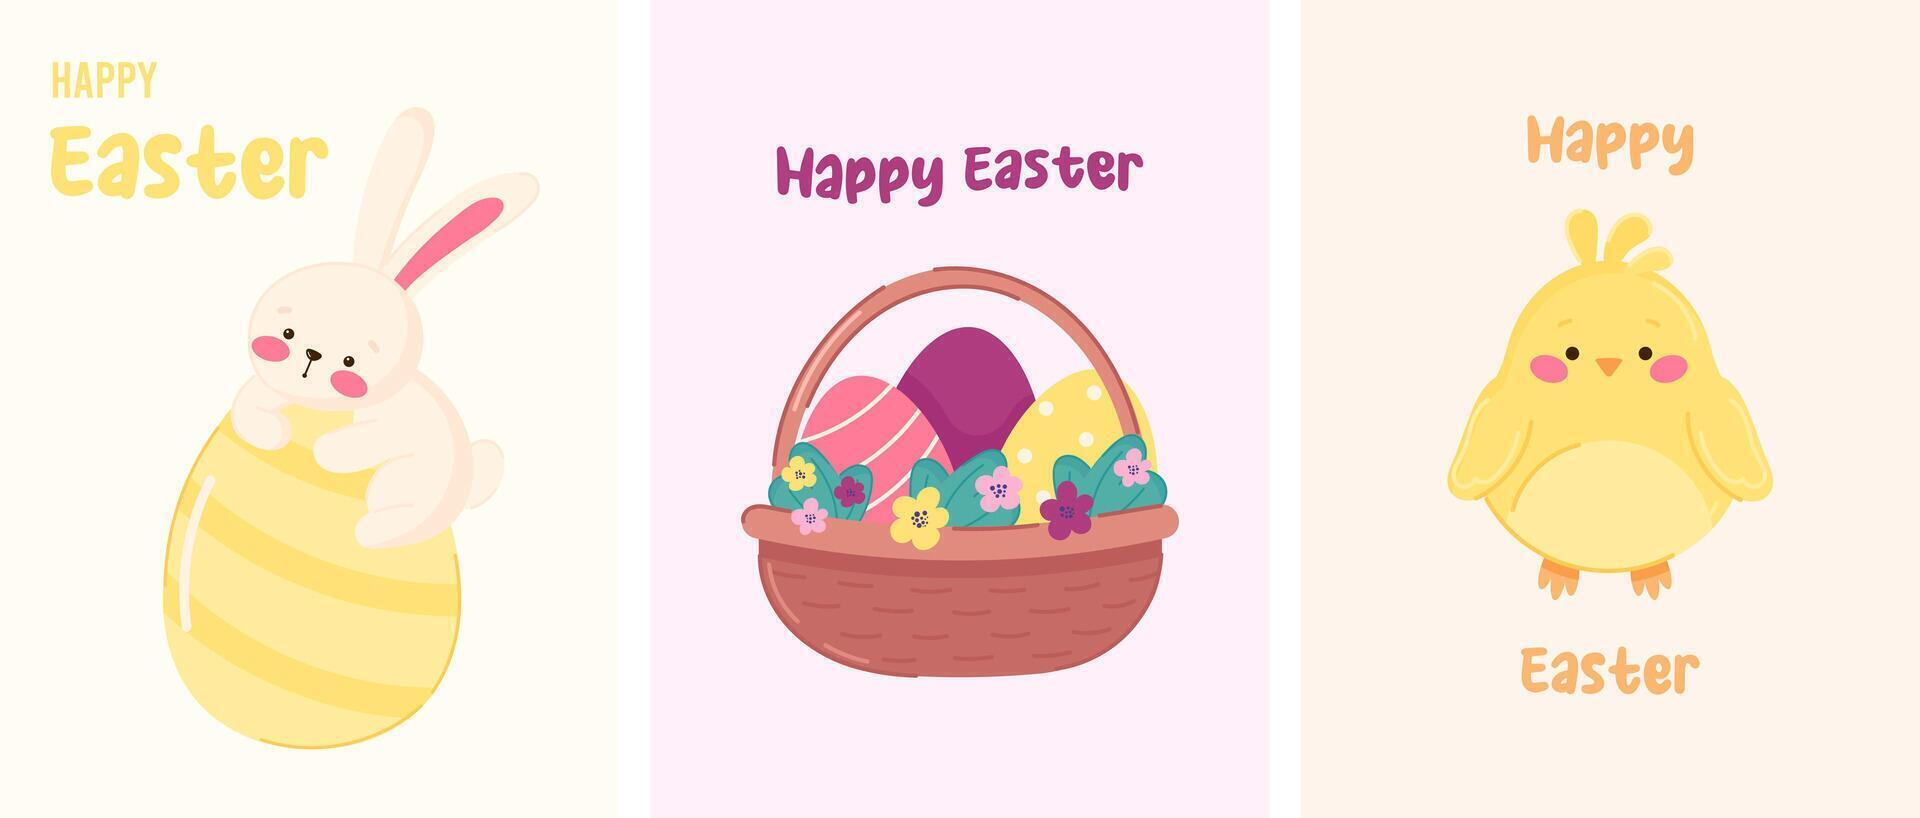 Happy Easter set of cards, posters, banner templates with cute bunny, chick and basket with Easter eggs vector